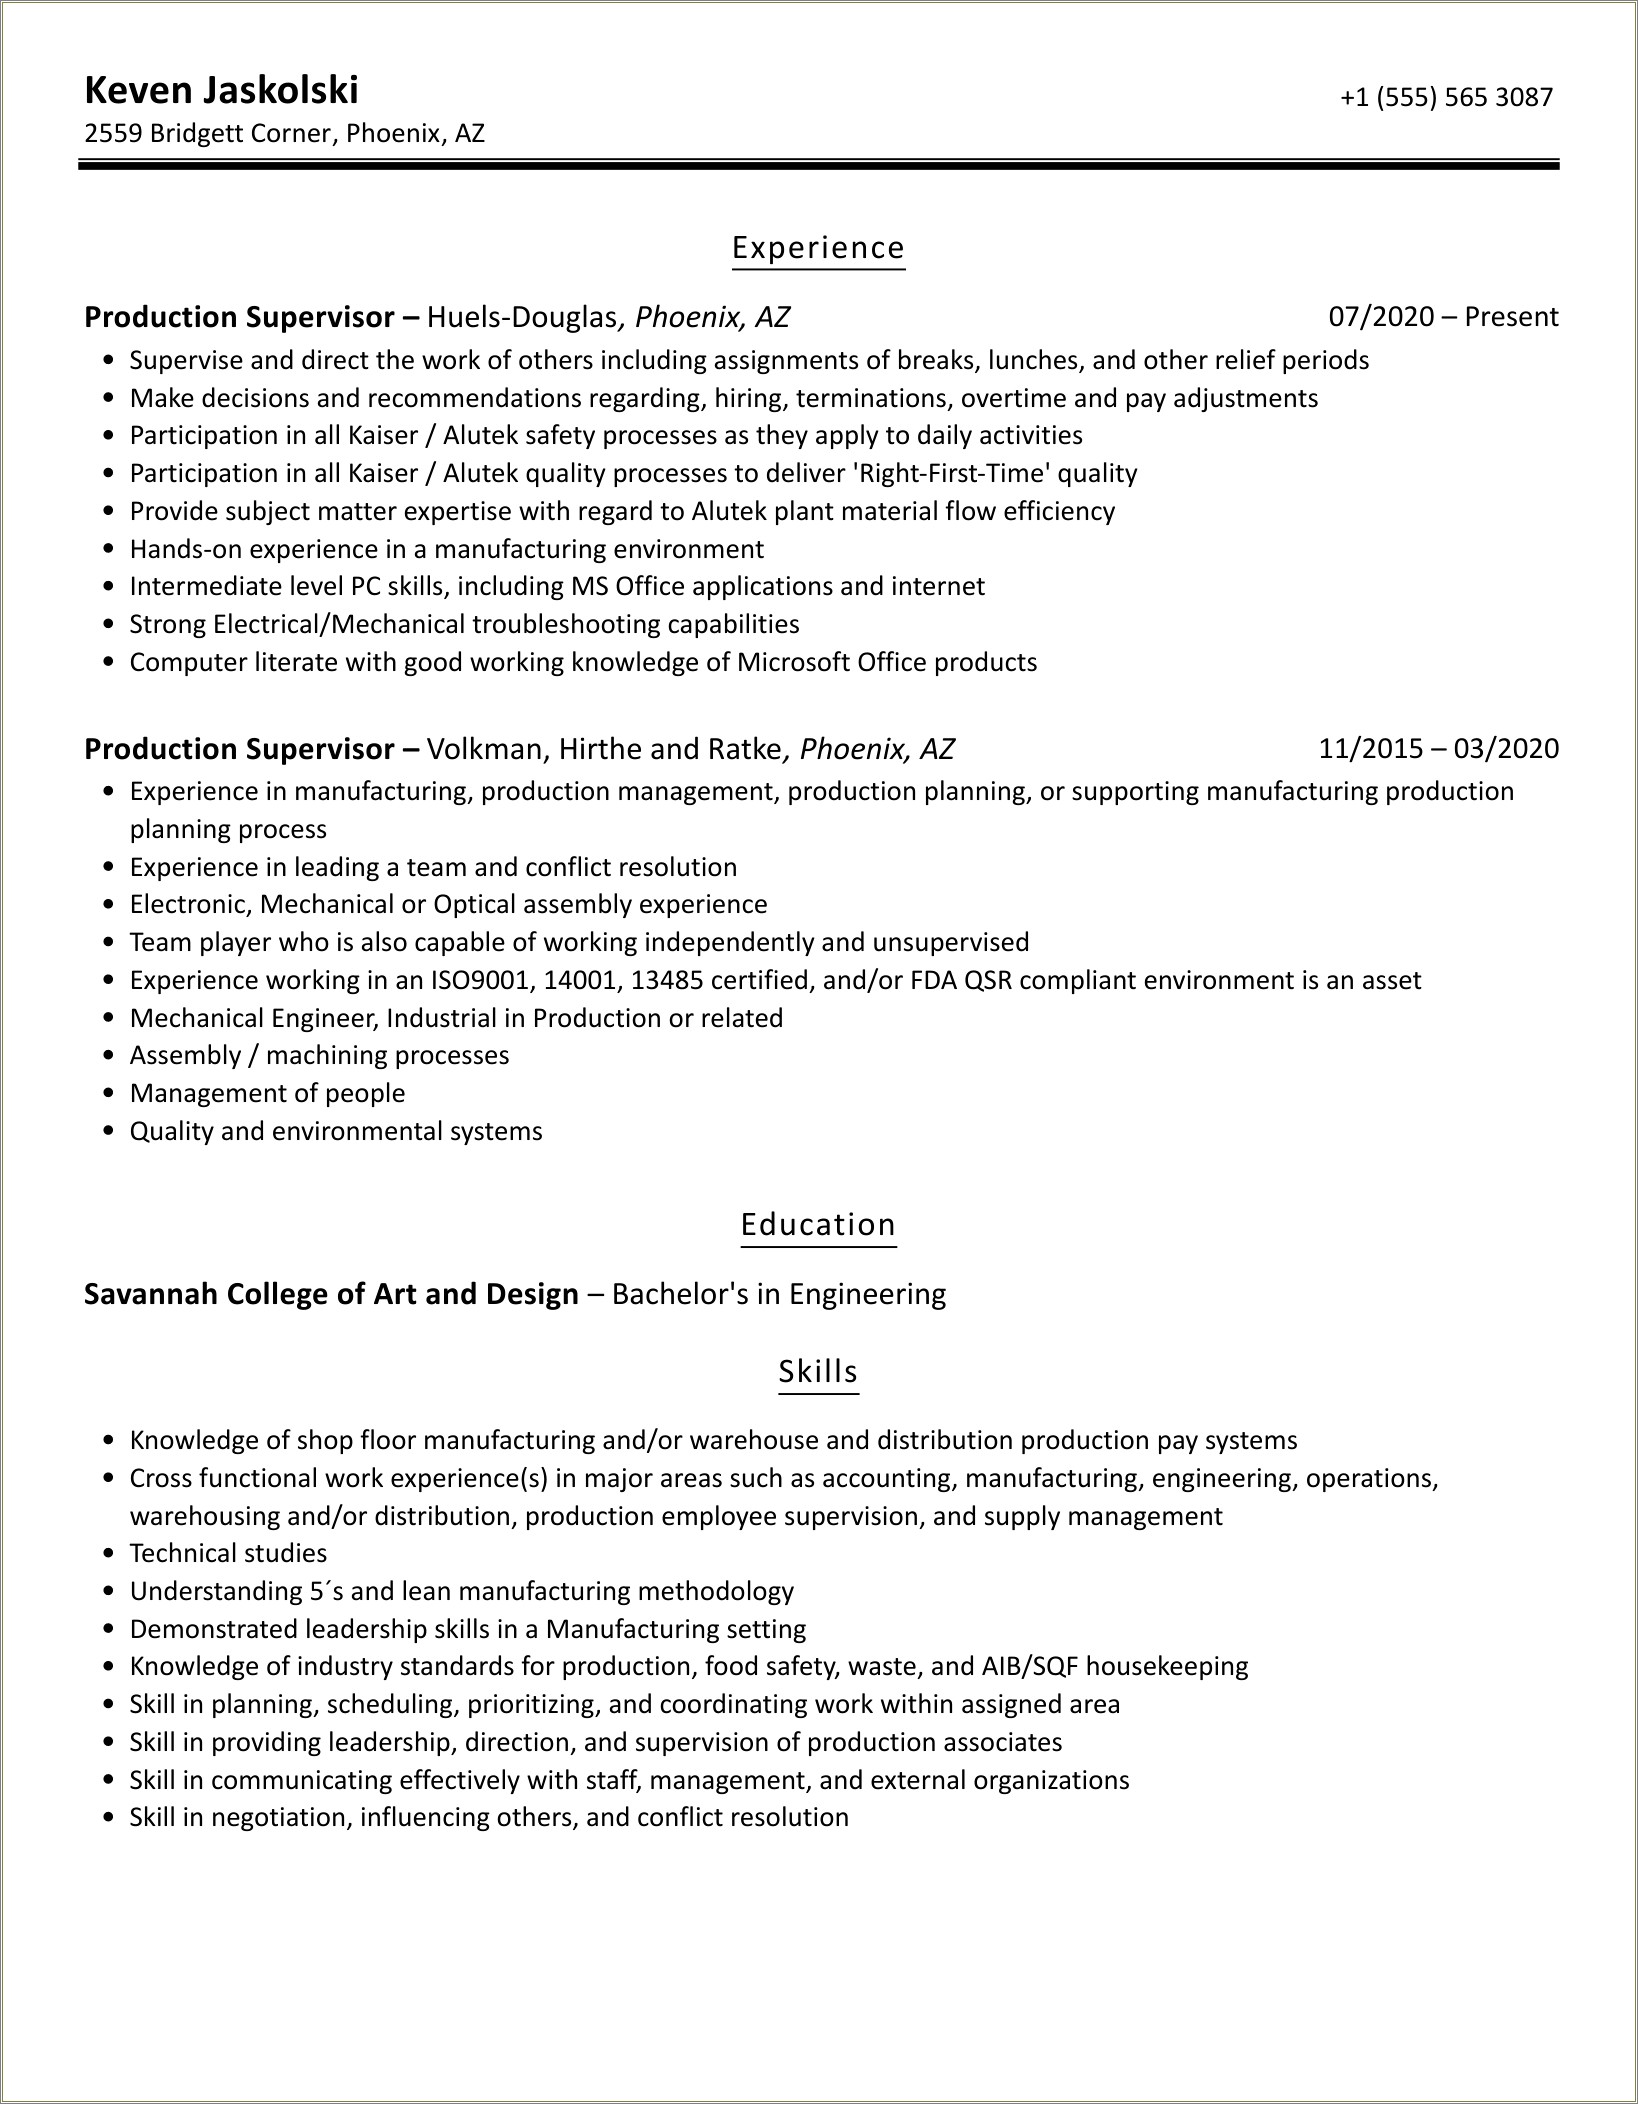 Production Supervisor Manpower Sample In A Resume